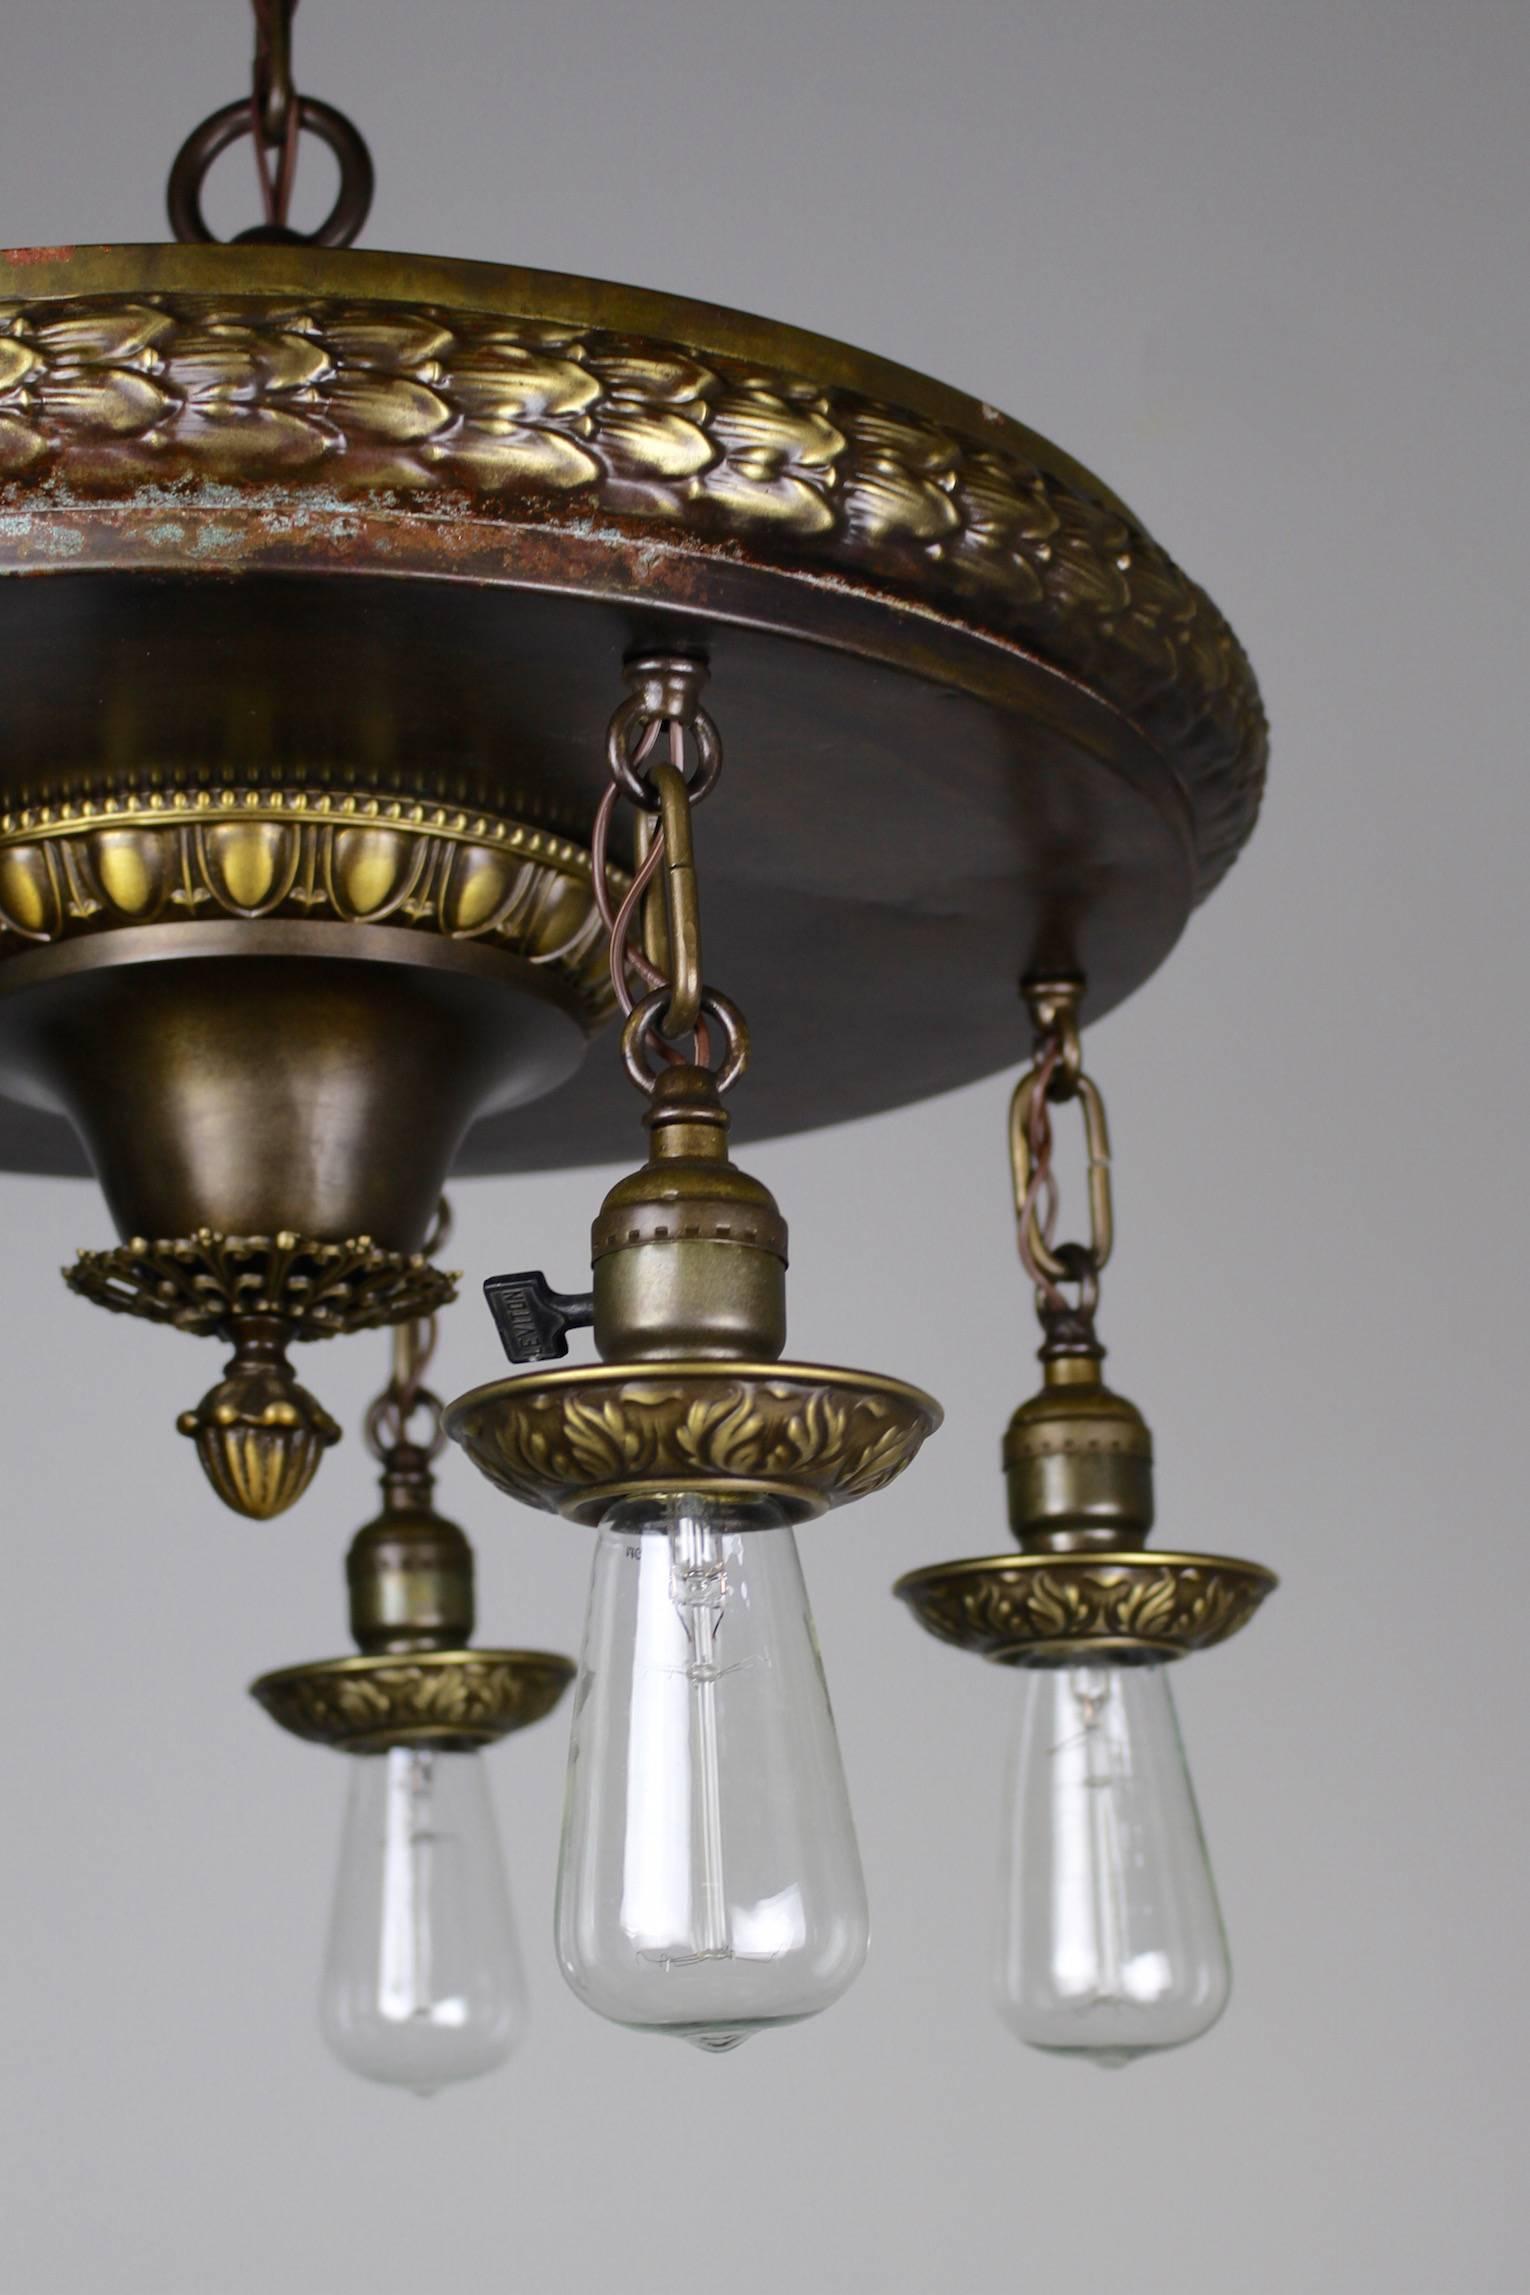 American 1920s Five-Light Neoclassical Revival Dining Room Fixture For Sale